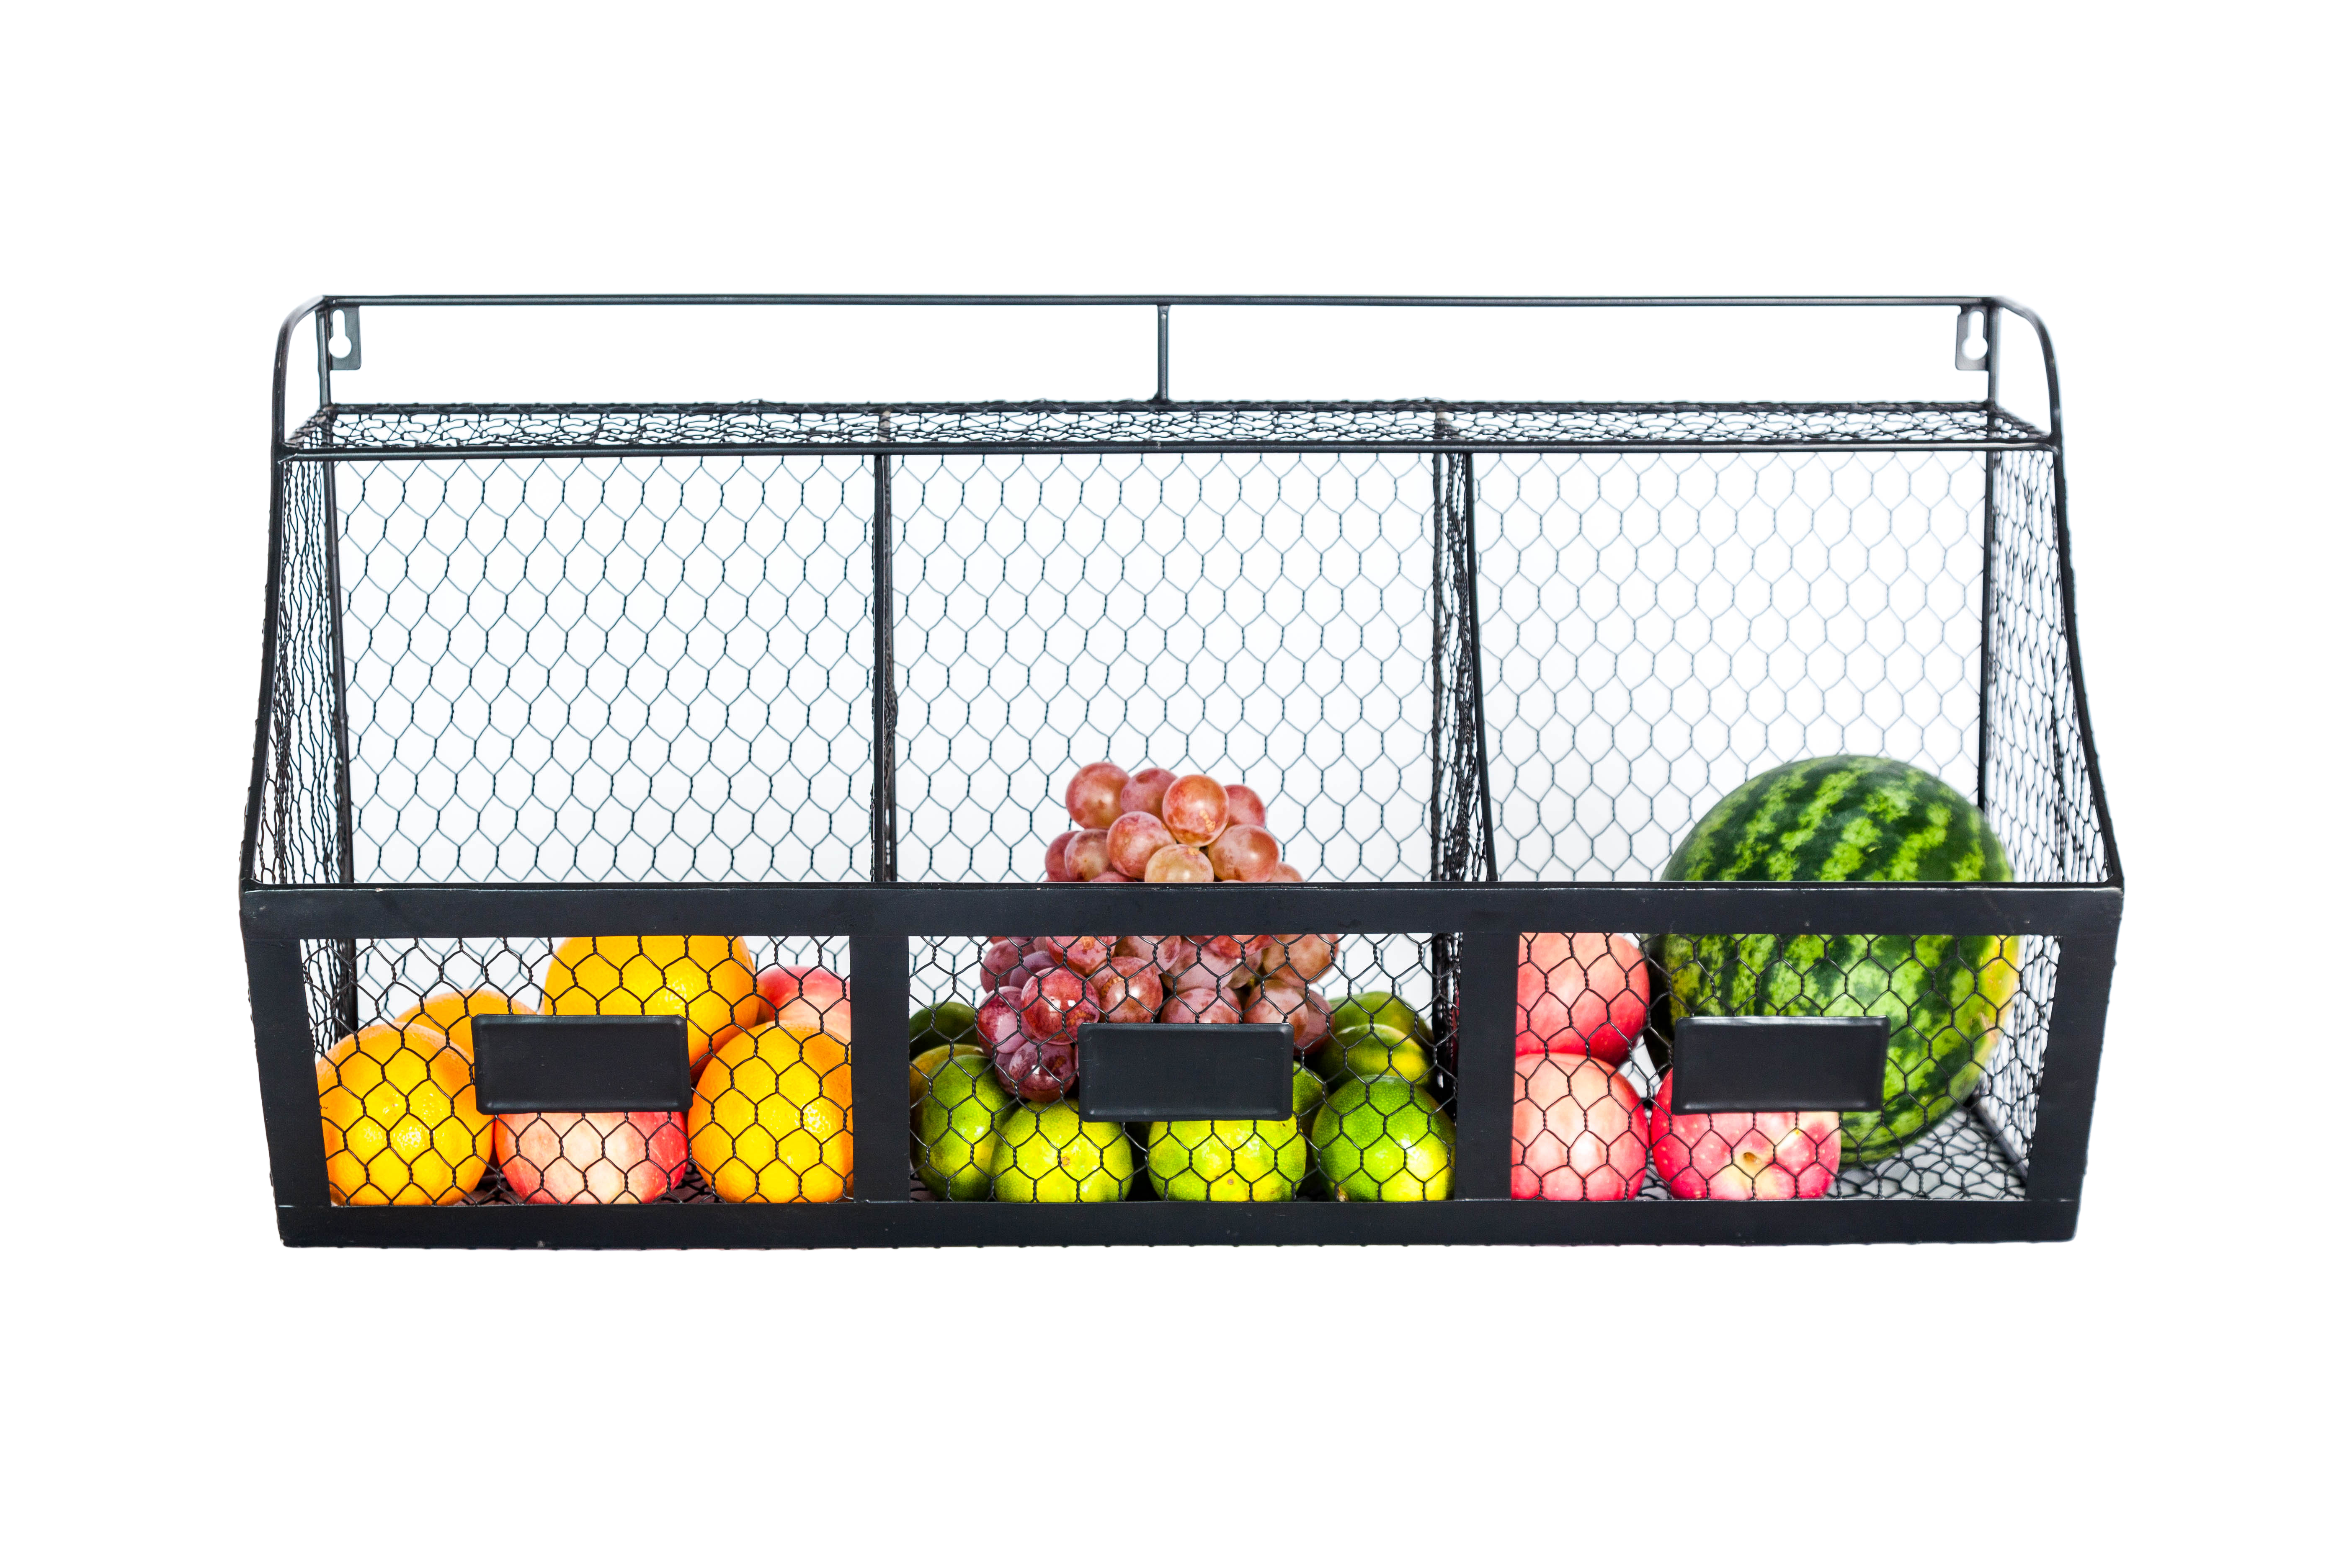 K-Cliffs 3 Compartment Basket, Large Wall Mount Metal Storage Hanging Fruit Organizer  Wire Baskets  Black Dimensions; 26x13x10 - image 5 of 5